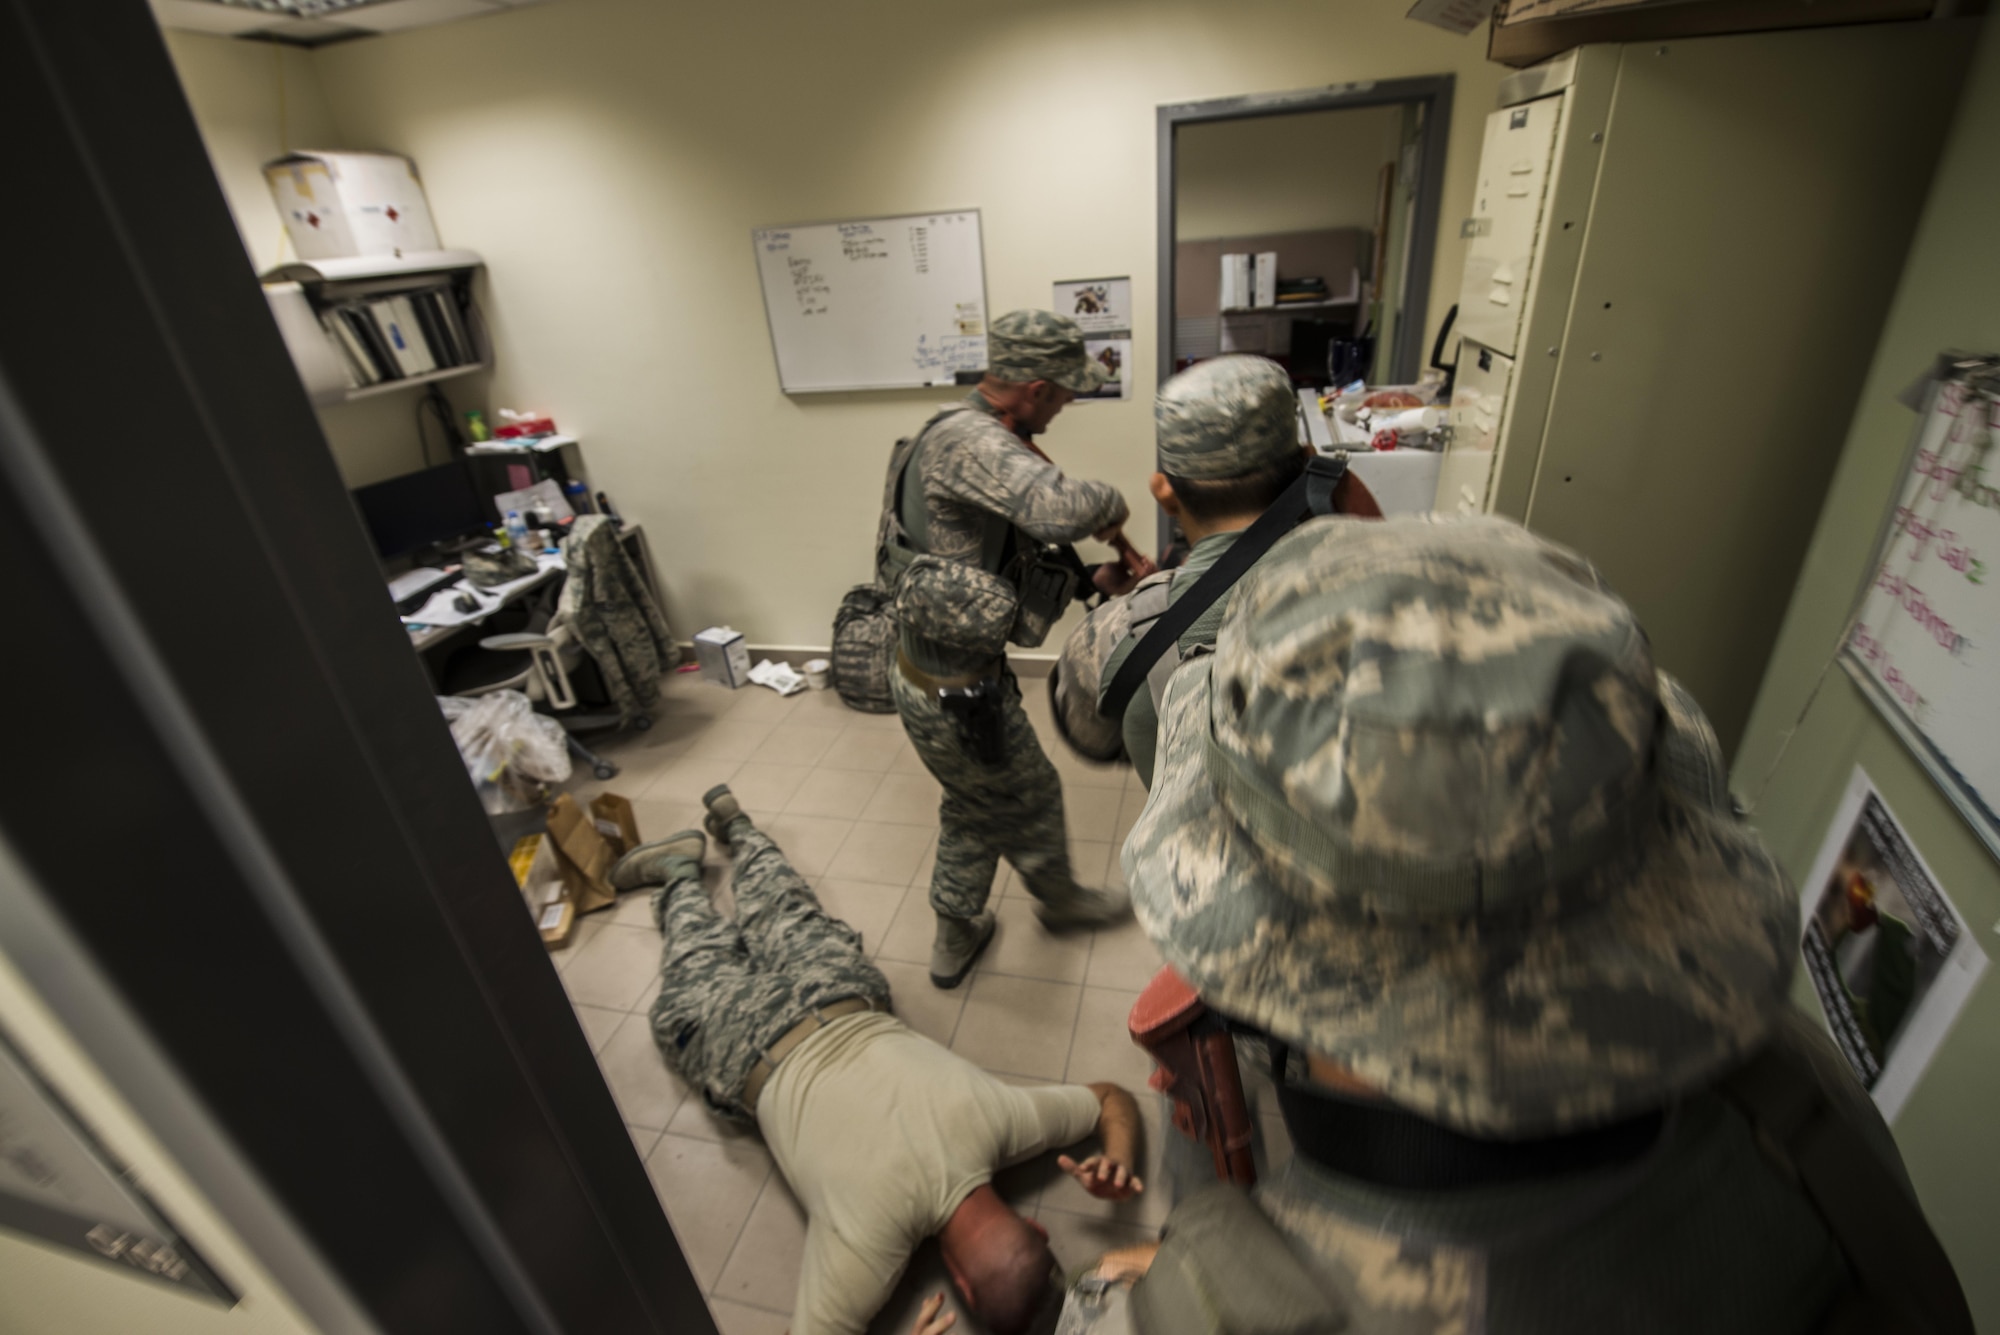 Members of the 379th Expeditionary Security Forces Squadron apprehend a member while clearing out a room searching for any possible threats during an active shooter scenario at a medical warehouse facility June 19, 2015, at Al Udeid Air Base, Qatar. Several agencies on base were tested on their reactions to the scenario to make sure proper protocols were followed in case an on-base incident truly ever occurred. (U.S. Air Force photo by Tech. Sgt. Rasheen Douglas)